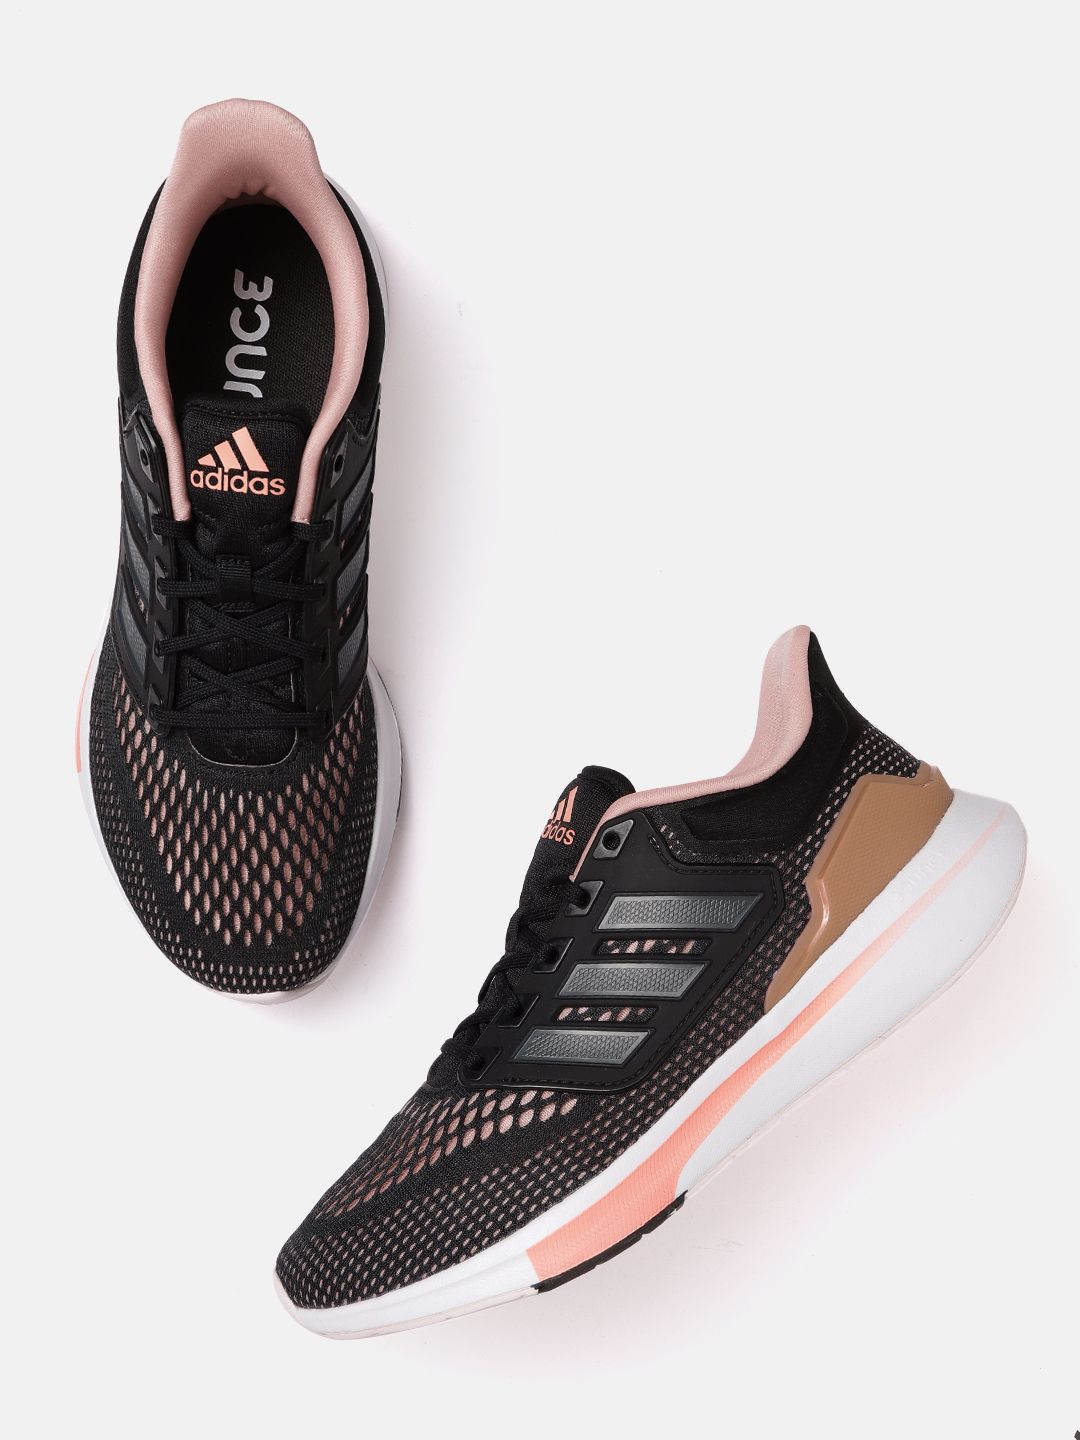 ADIDAS Women Black & Dusty Pink Woven Design EQ21 Run Shoes Price in India